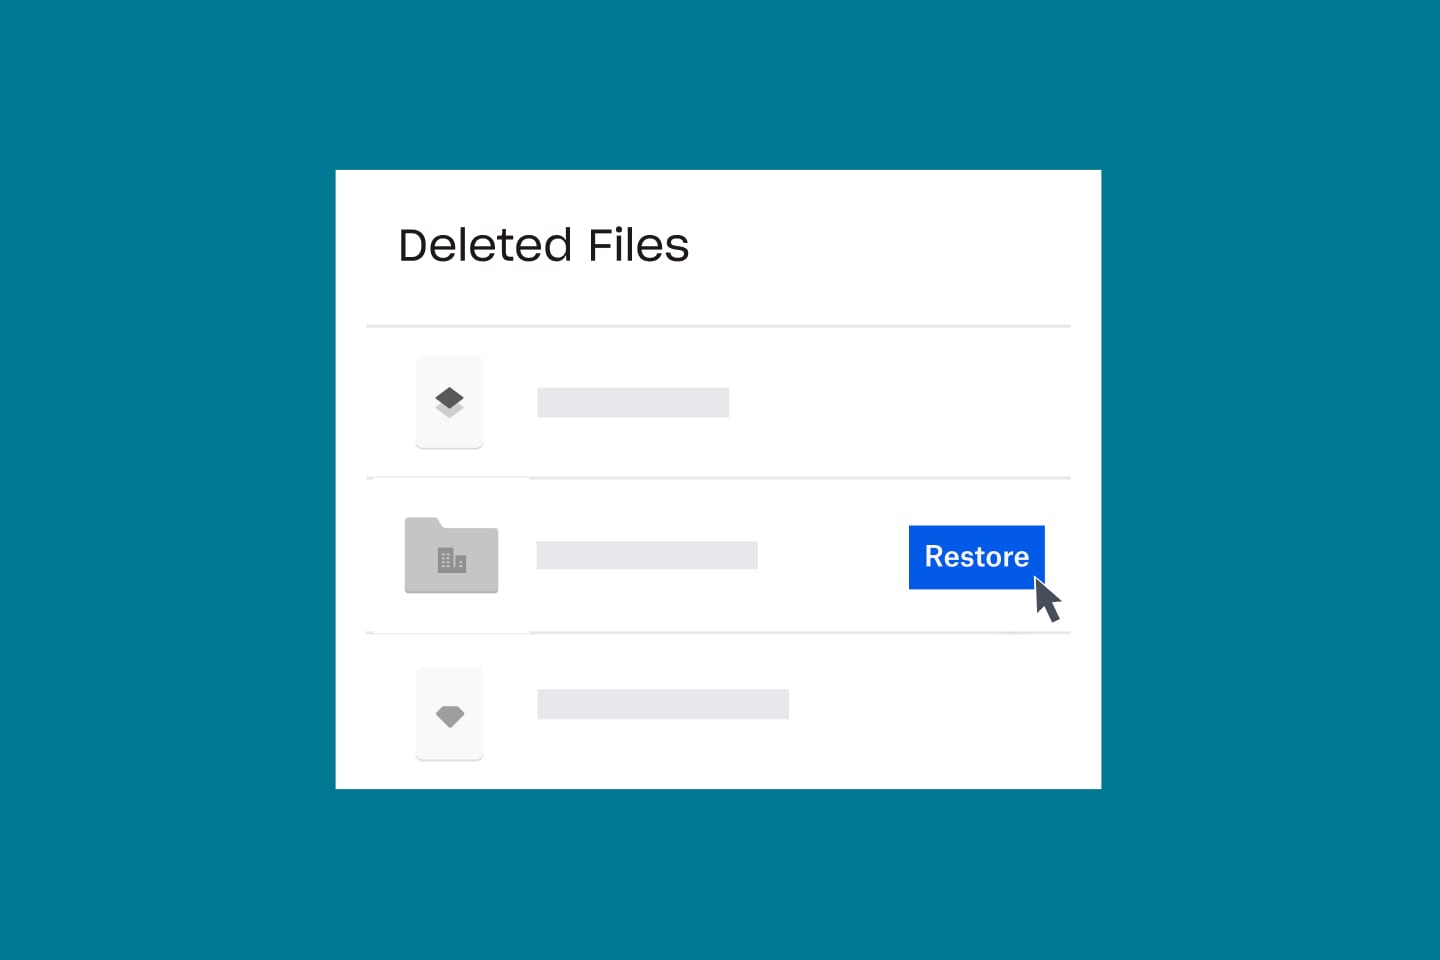 Someone restoring deleted files on their Dropbox account